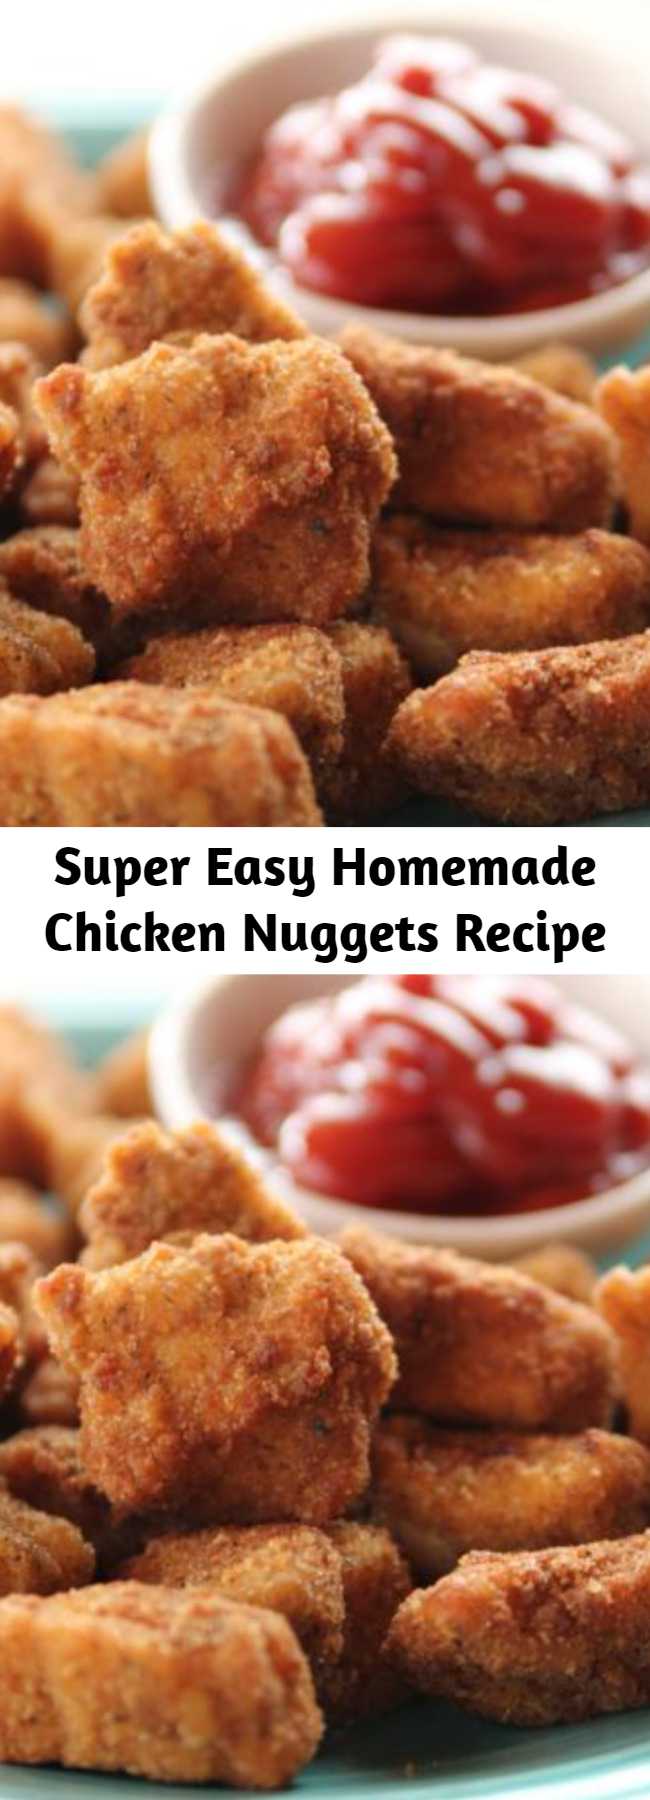 Super Easy Homemade Chicken Nuggets Recipe - Super easy to make and even more fun to eat!